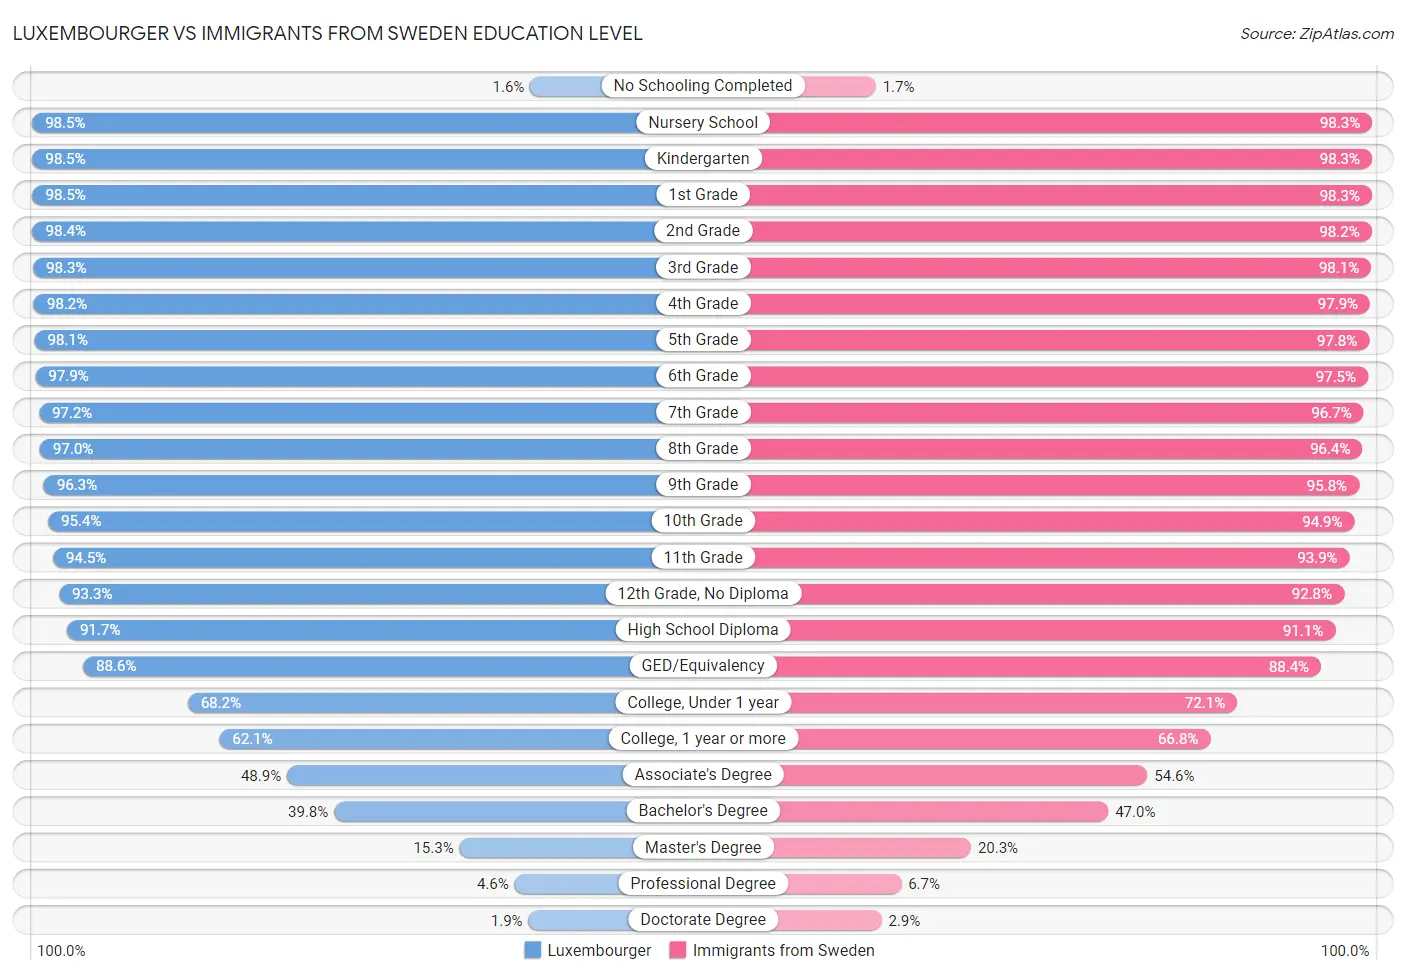 Luxembourger vs Immigrants from Sweden Education Level